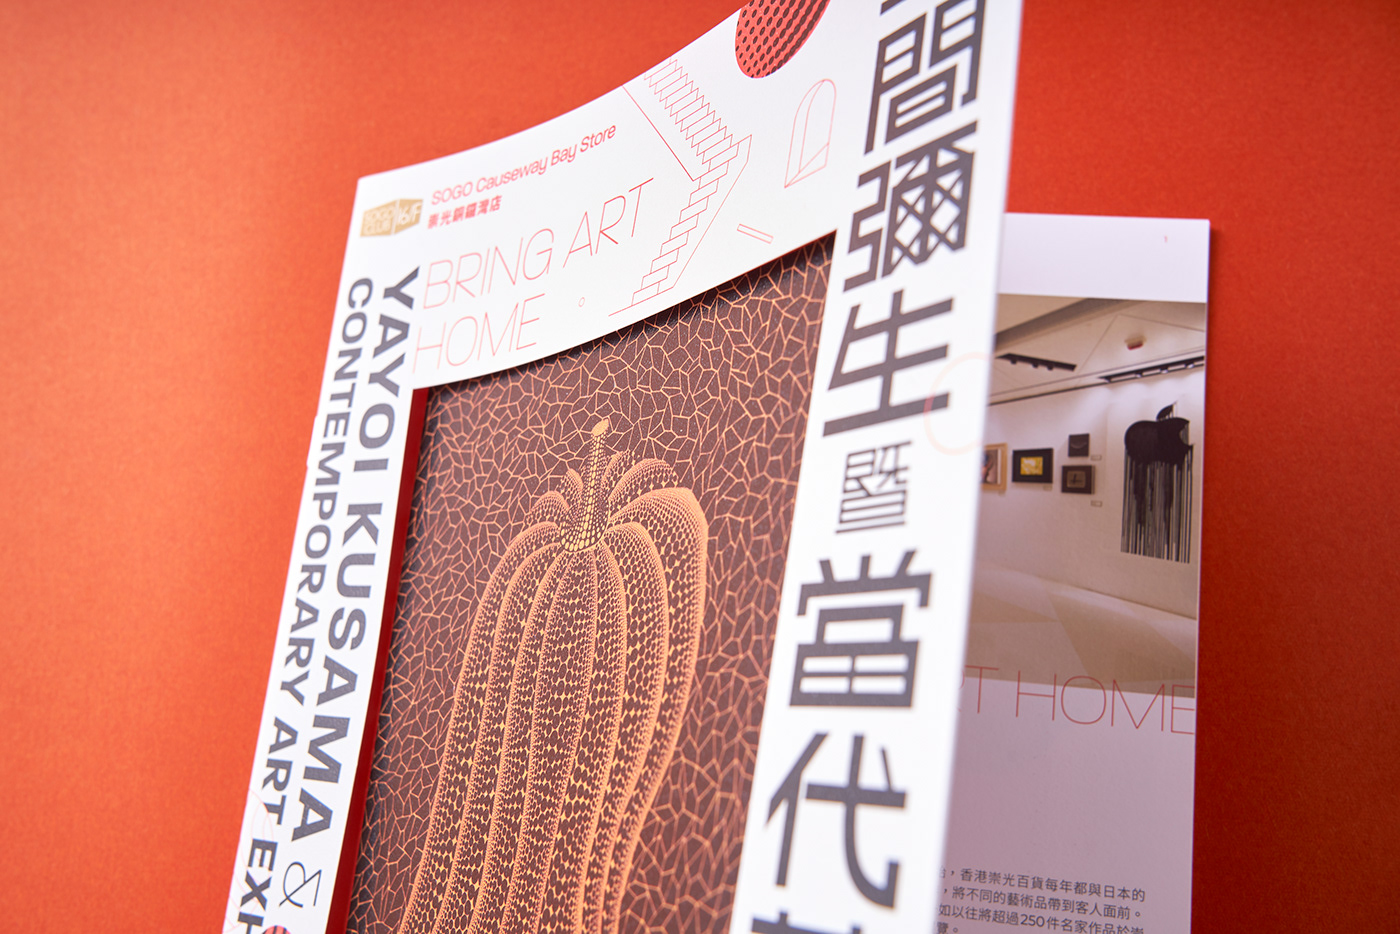 dot orange Booklet art home Drawing  Layout Keyvisual Exhibition  gallery